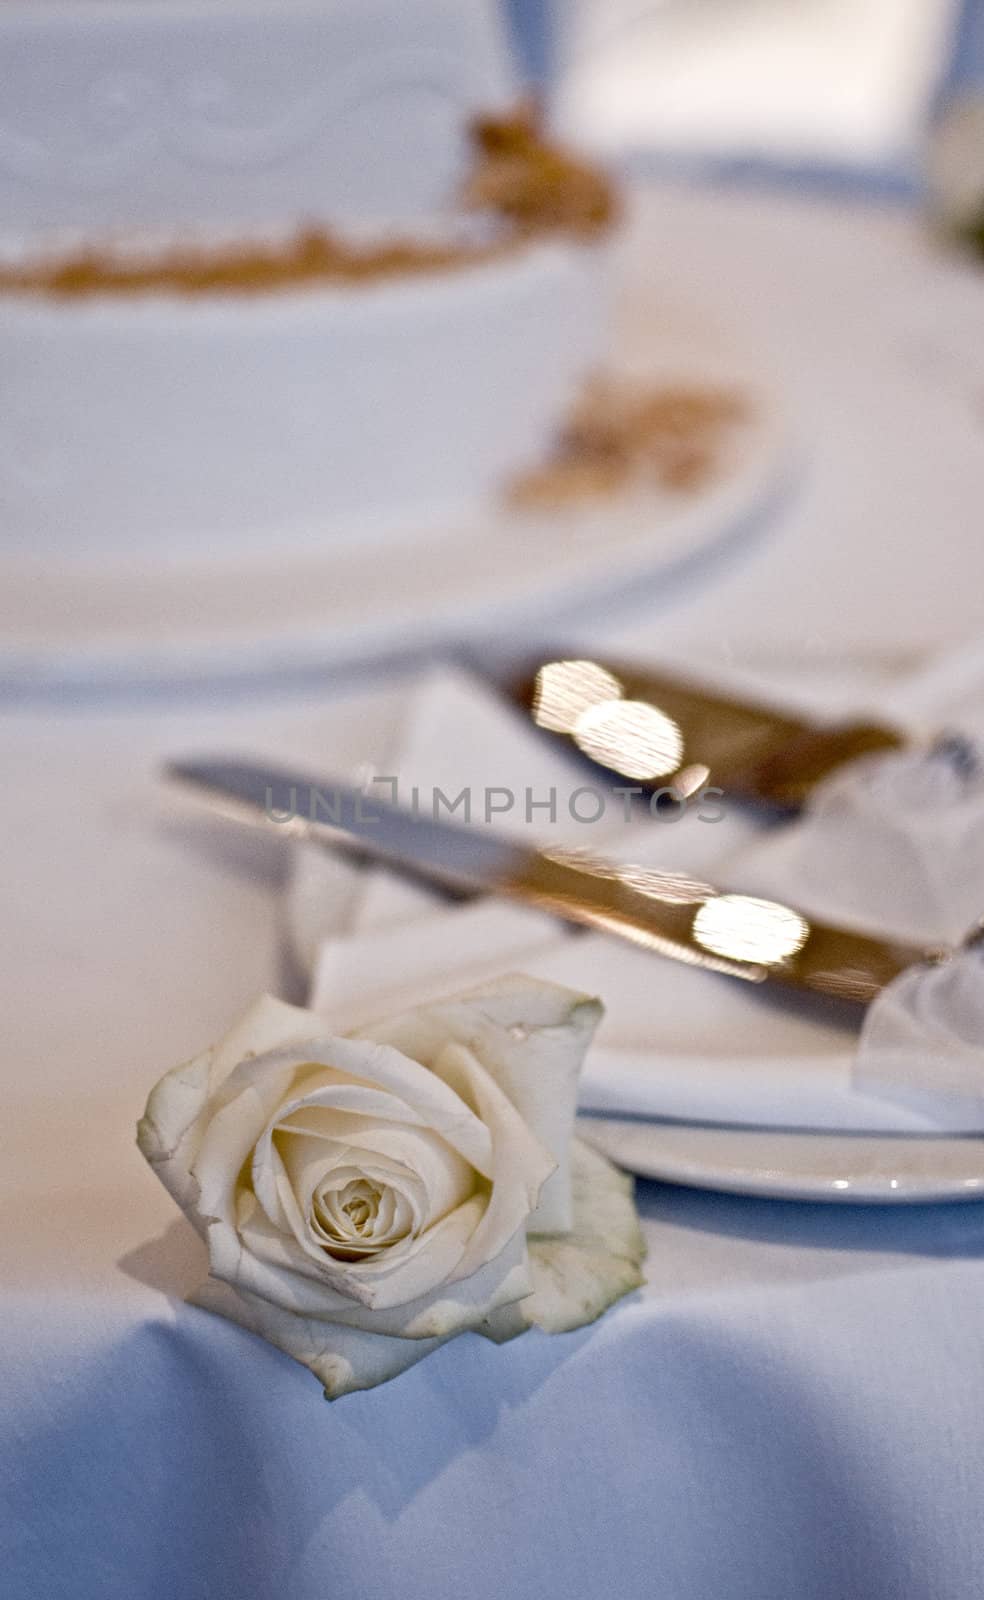 A single white rose with the wedding cake in the background.